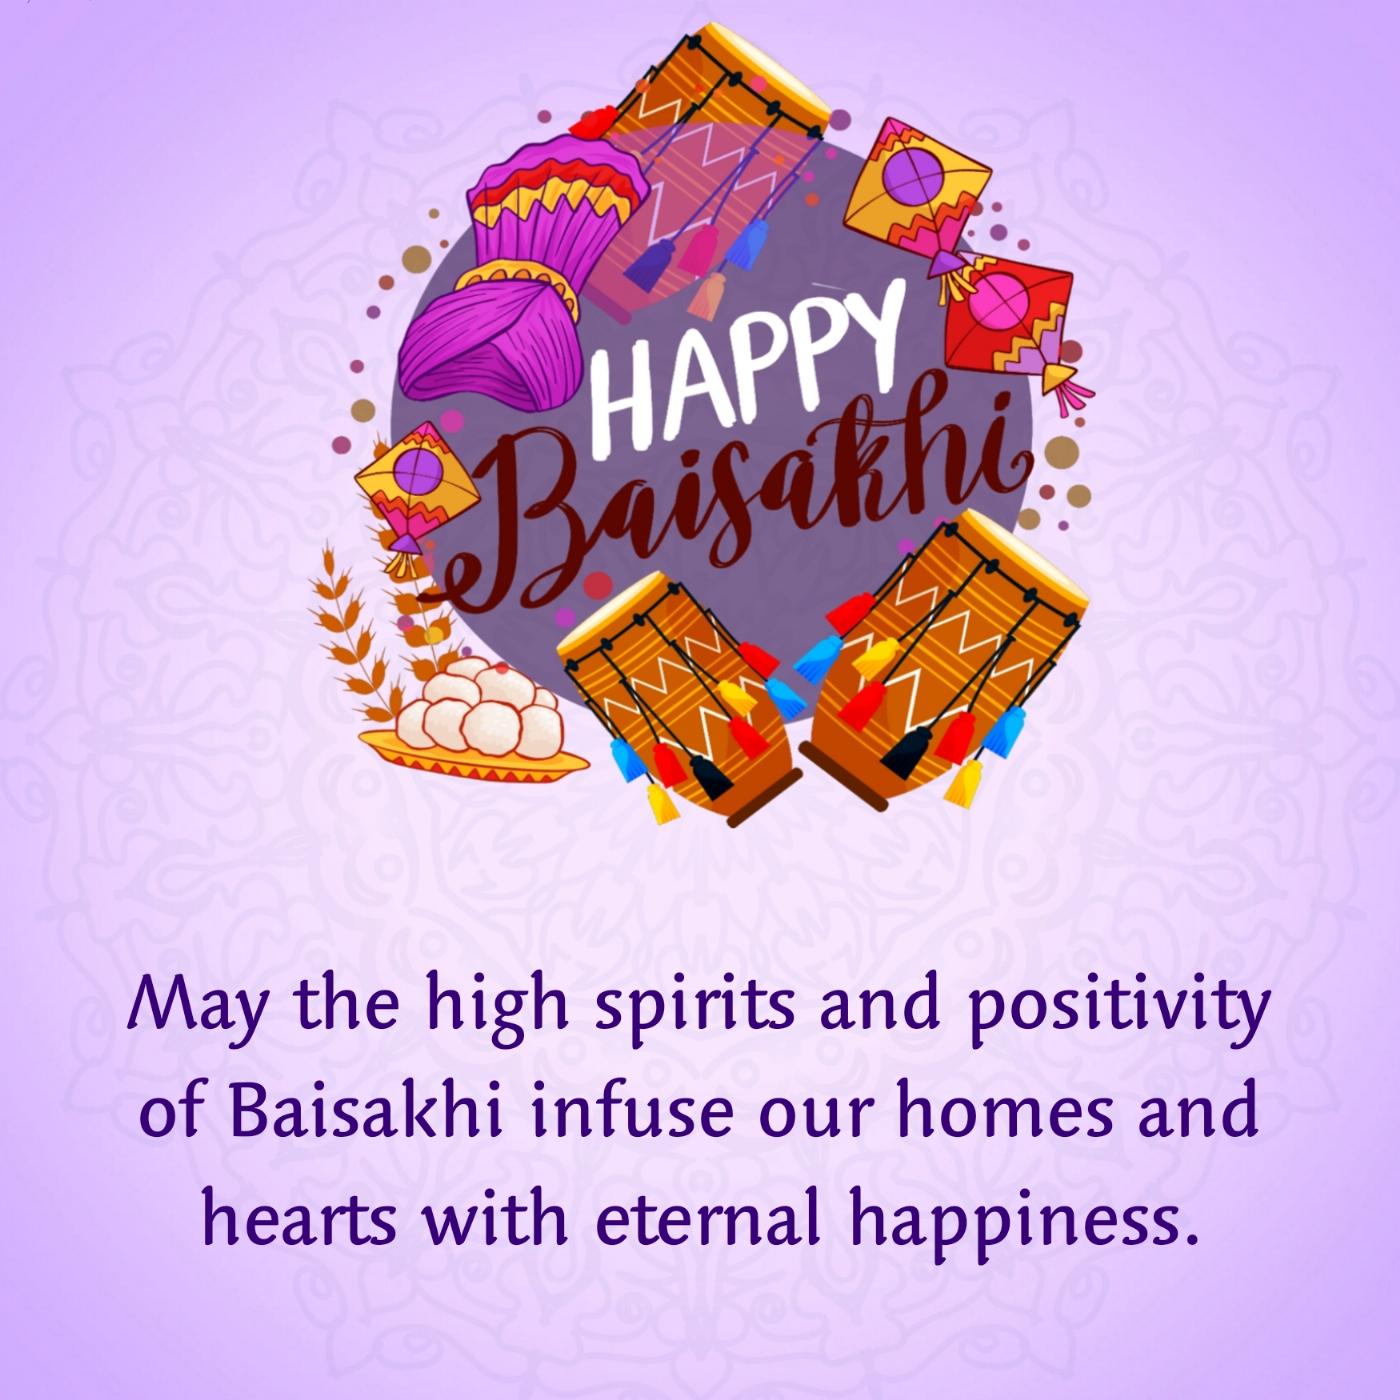 May the high spirits and positivity of Baisakhi infuse our homes